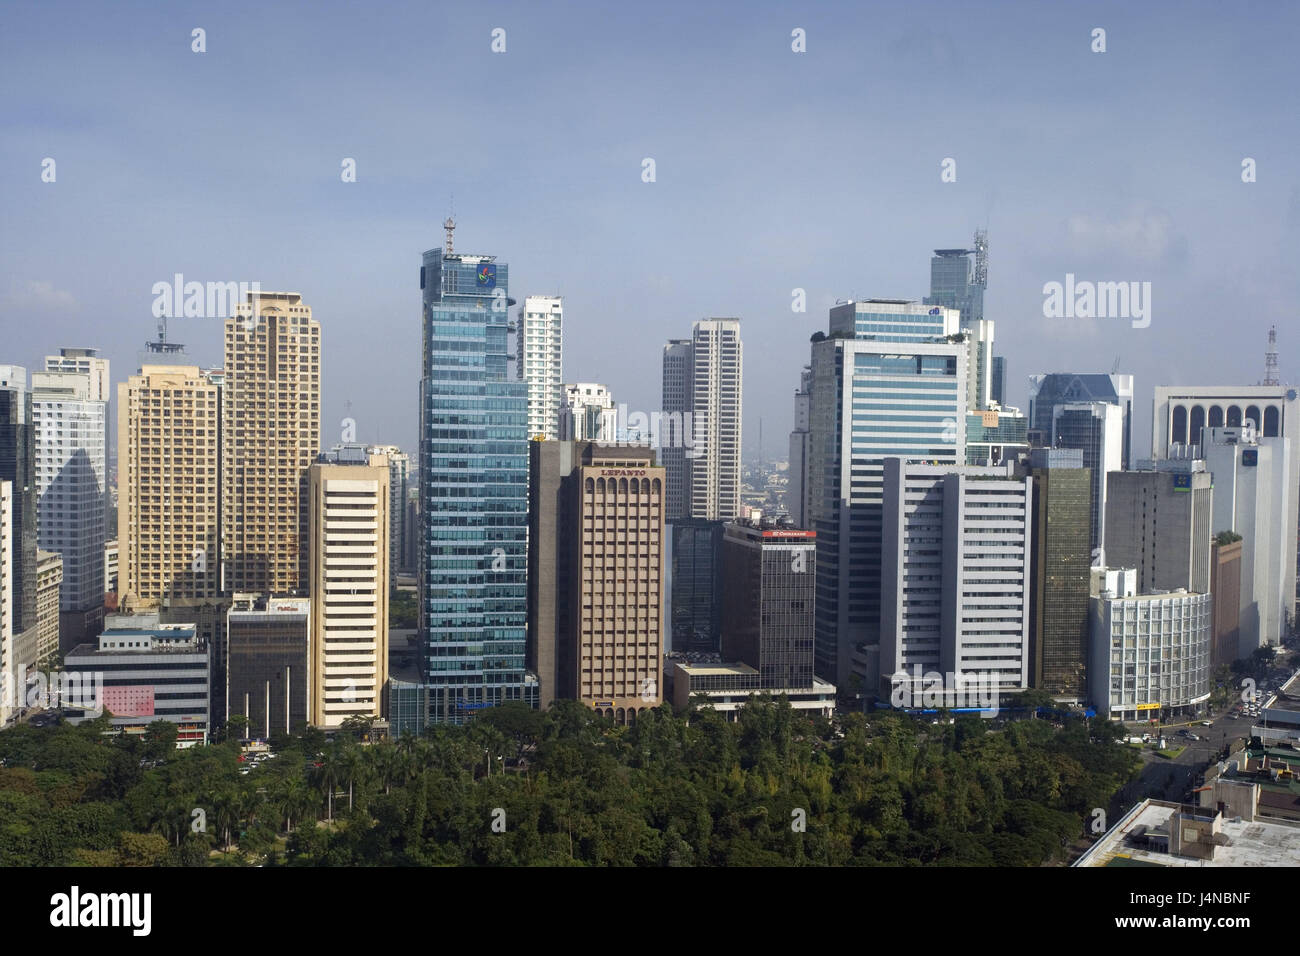 The Philippines, island Luzon, Manila, Makati District, town view, South-East Asia, high rises, buildings, office buildings, architecture, skyline, town, capital, Stock Photo